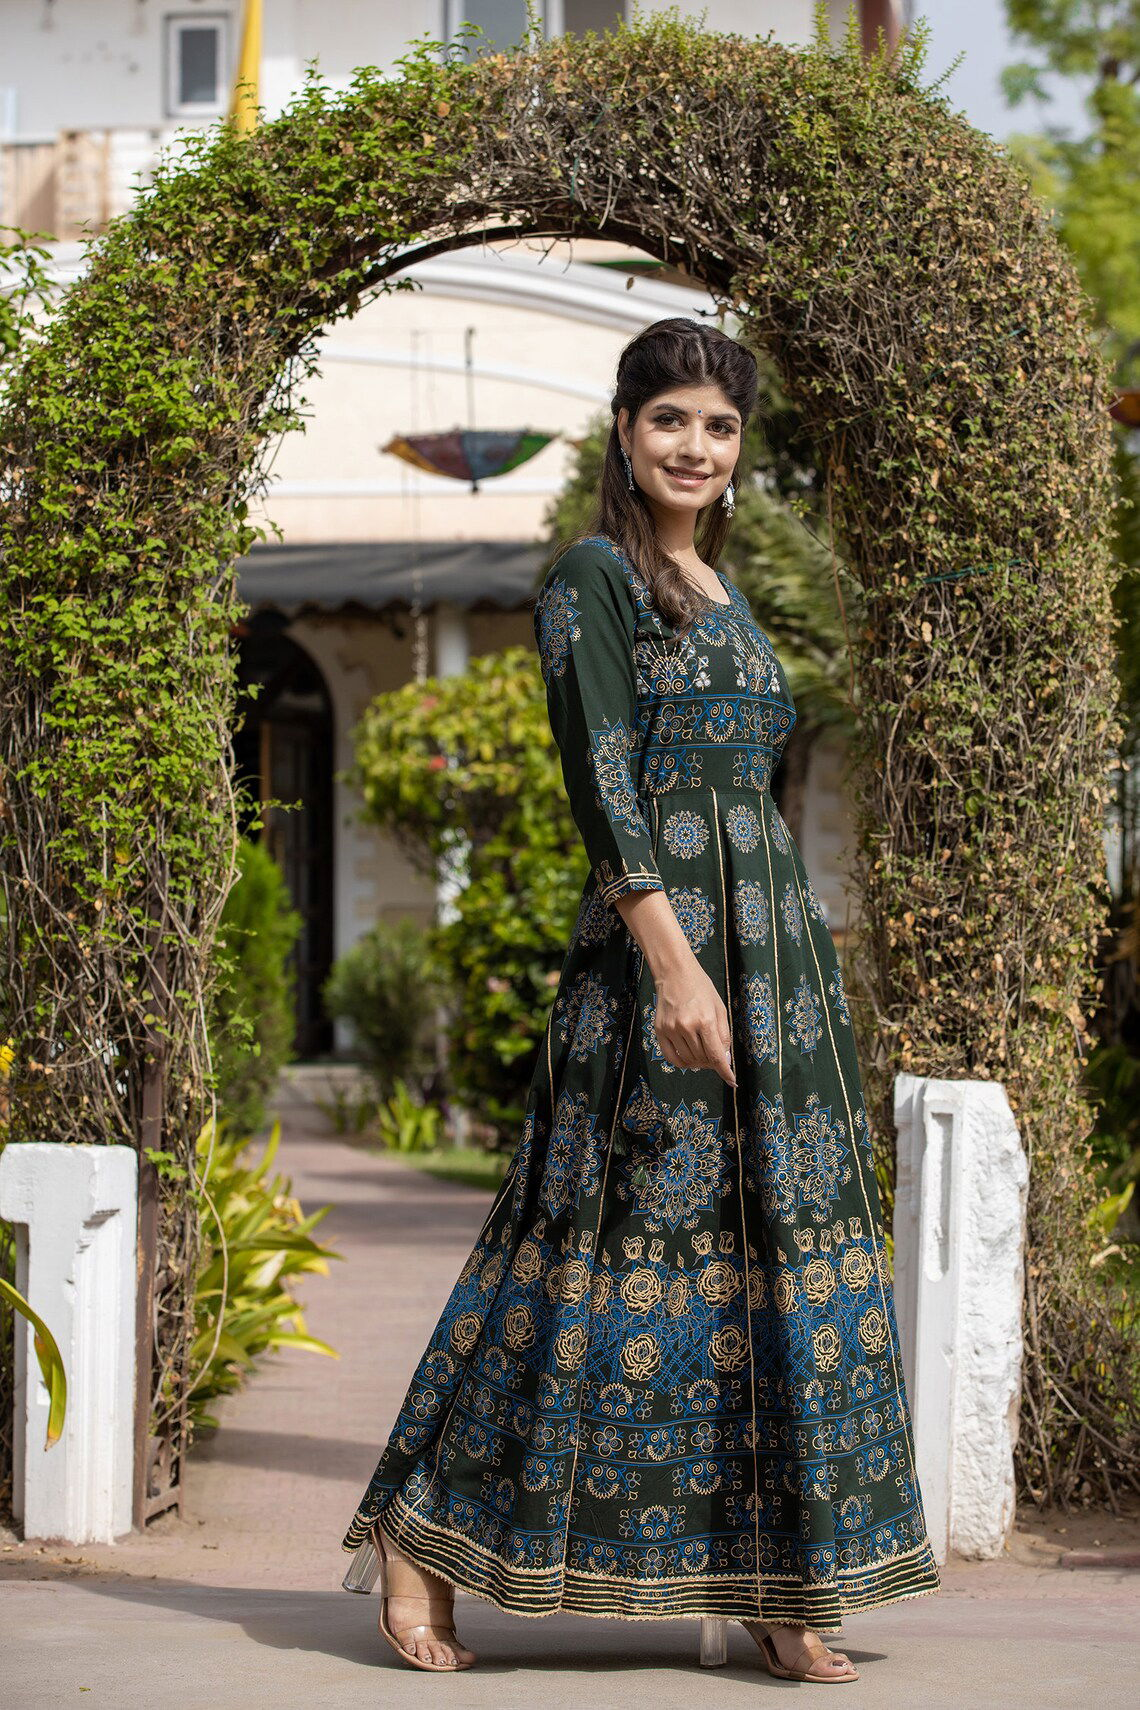 Green Floral Gold Printed Ethnic Gown Anarkali Dress - pacificexportsimports - #tag1#